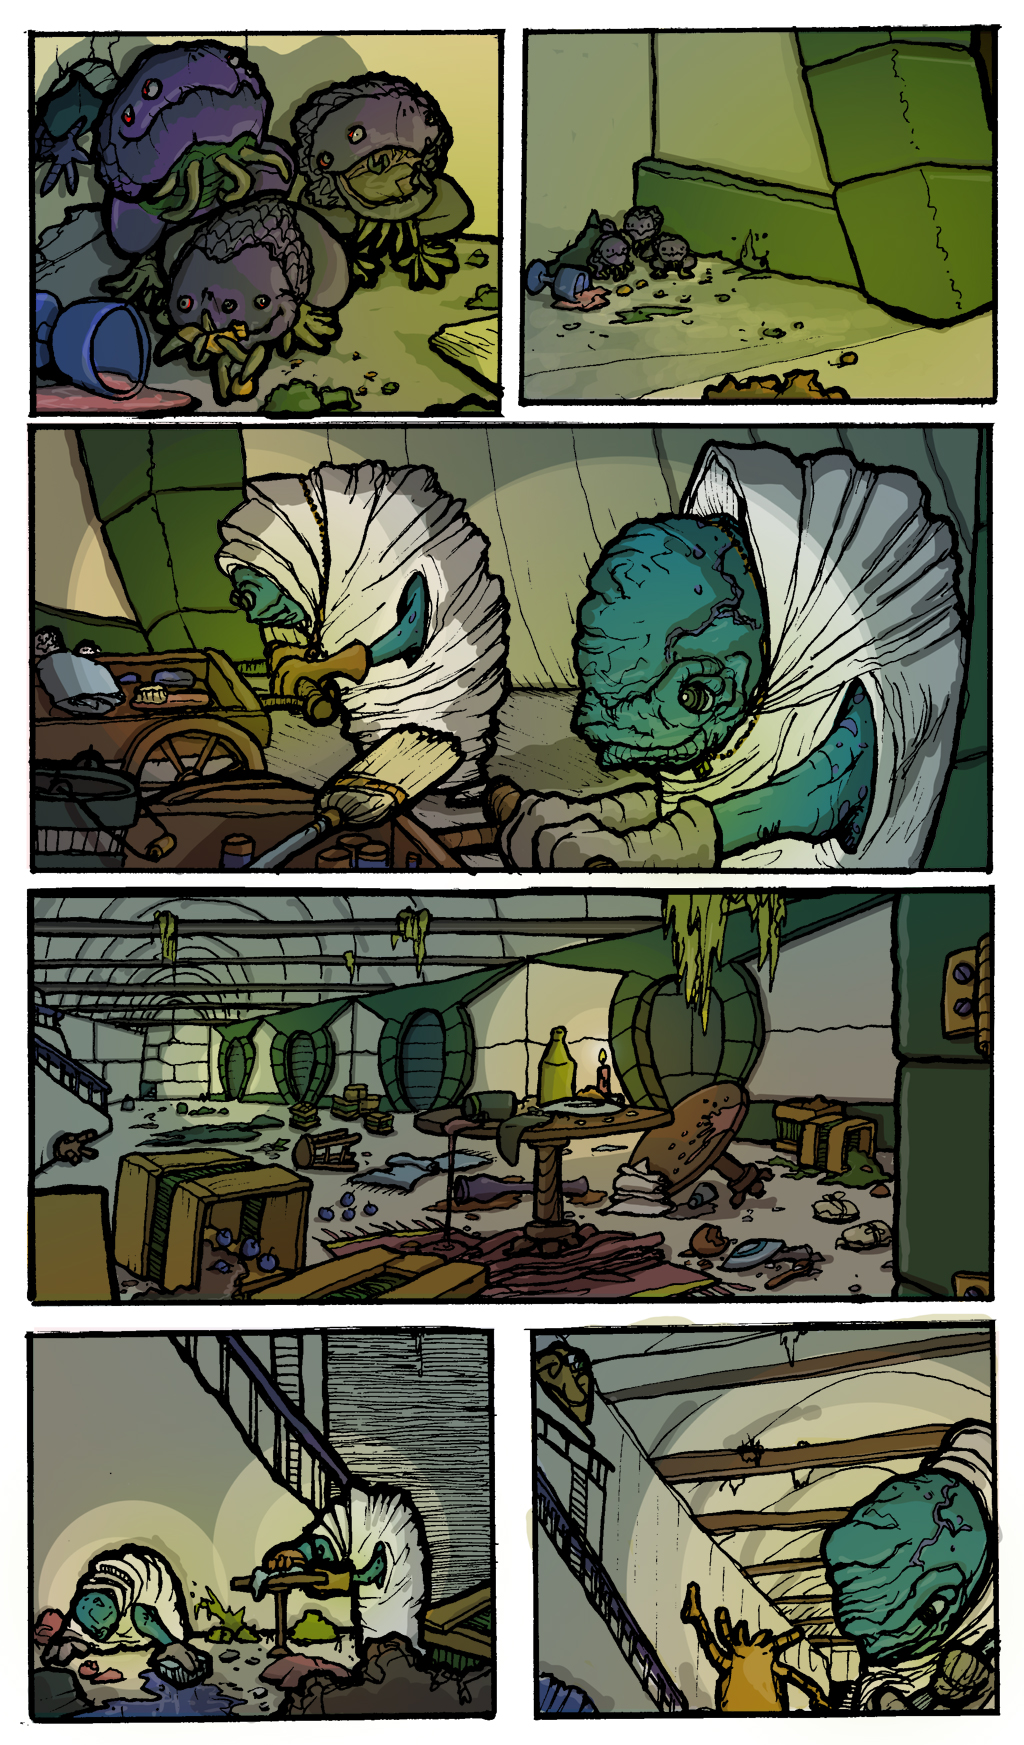 Girl in the Jar Allfield Graphic Novel Preview Pic 1